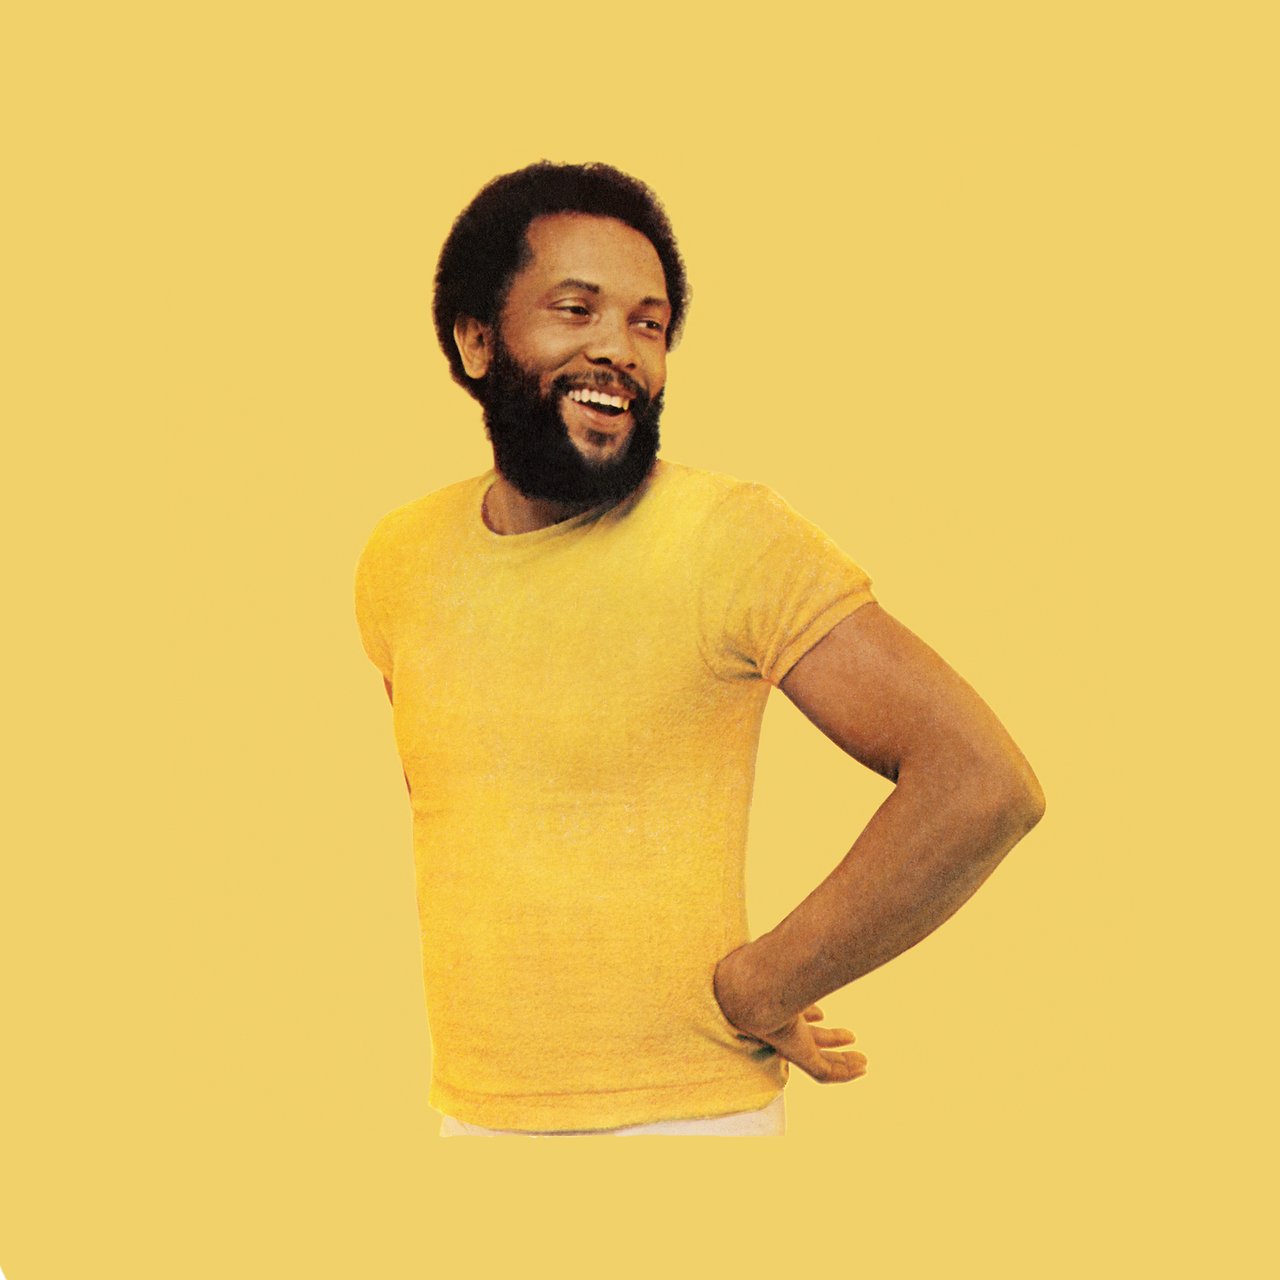 Happy bday to one of the top 5 musicians out of LA &most sampled,
Roy Ayers ! 